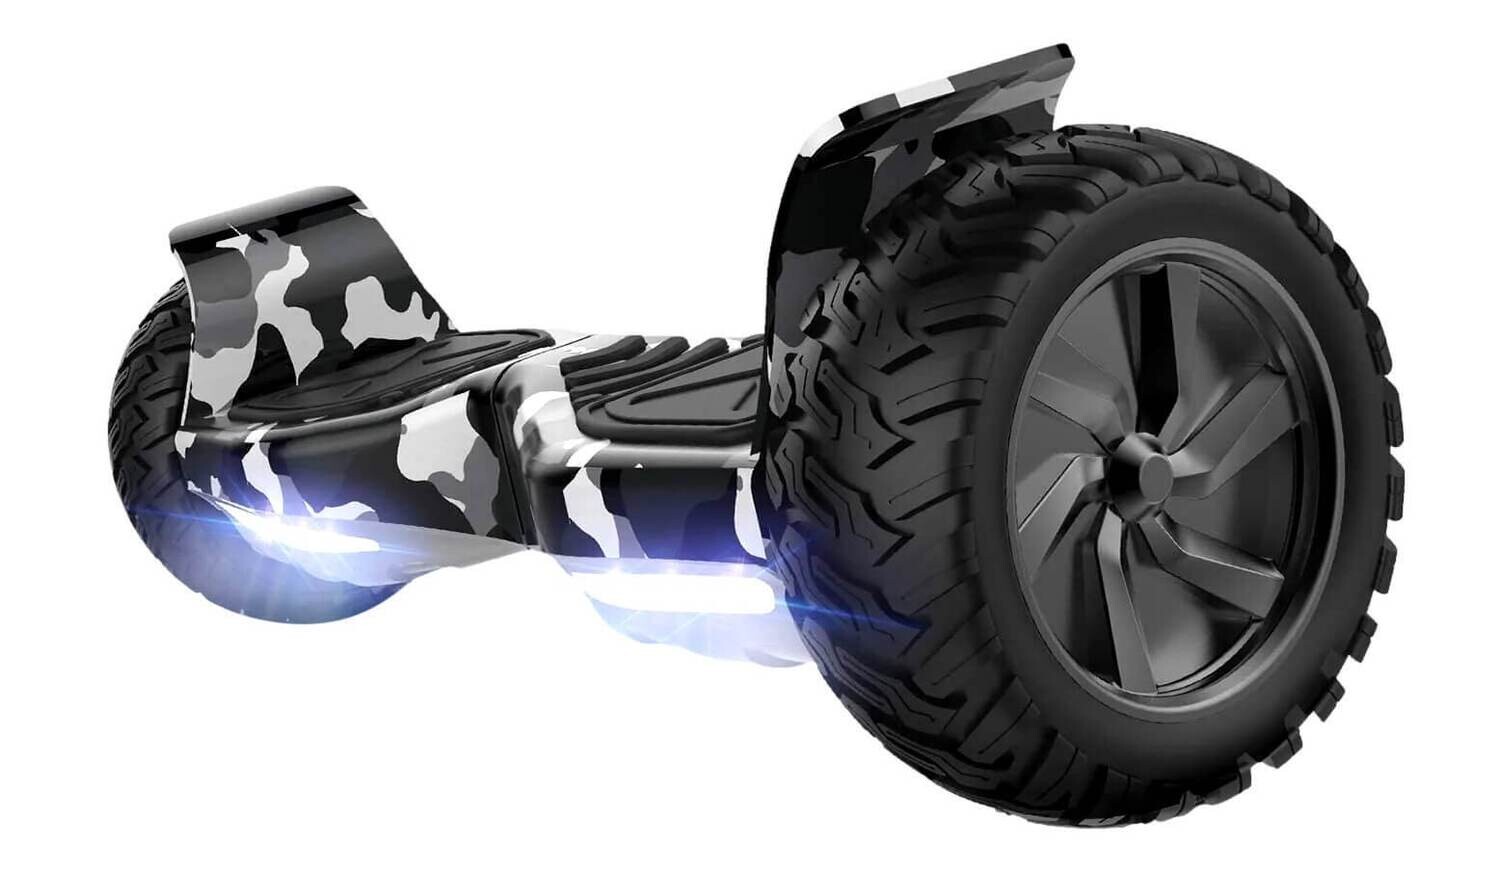 Camouflage 8.5" All Terrain Off Road Hoverboard Segway Hummer